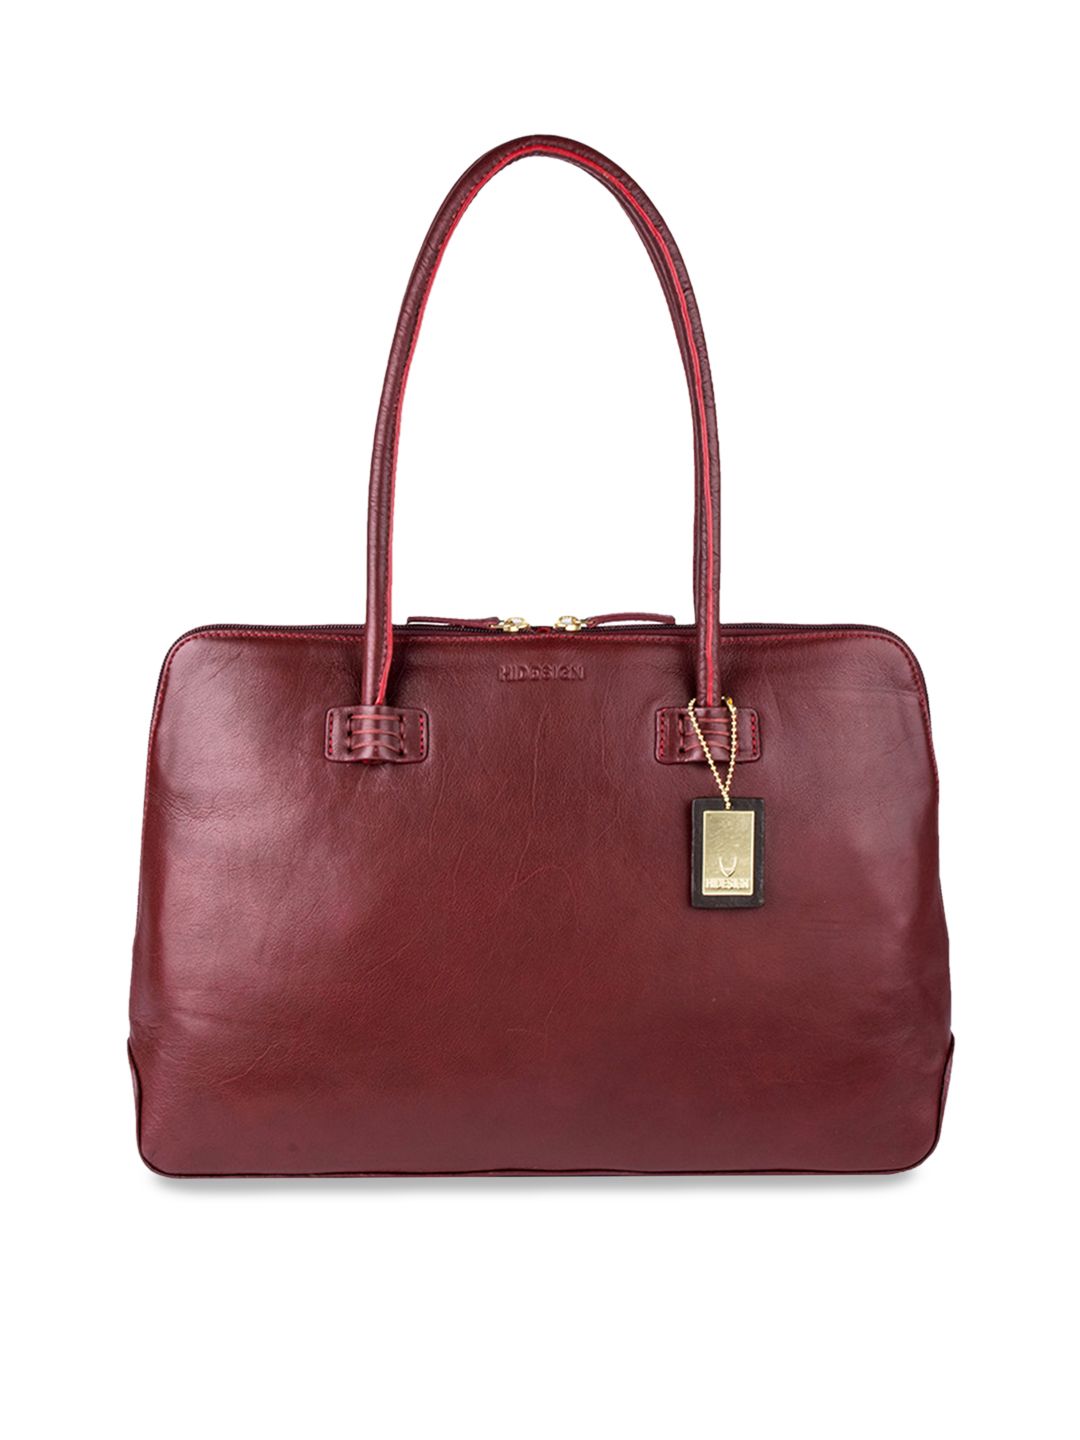 Hidesign Red Solid Leather Shoulder Bag Price in India